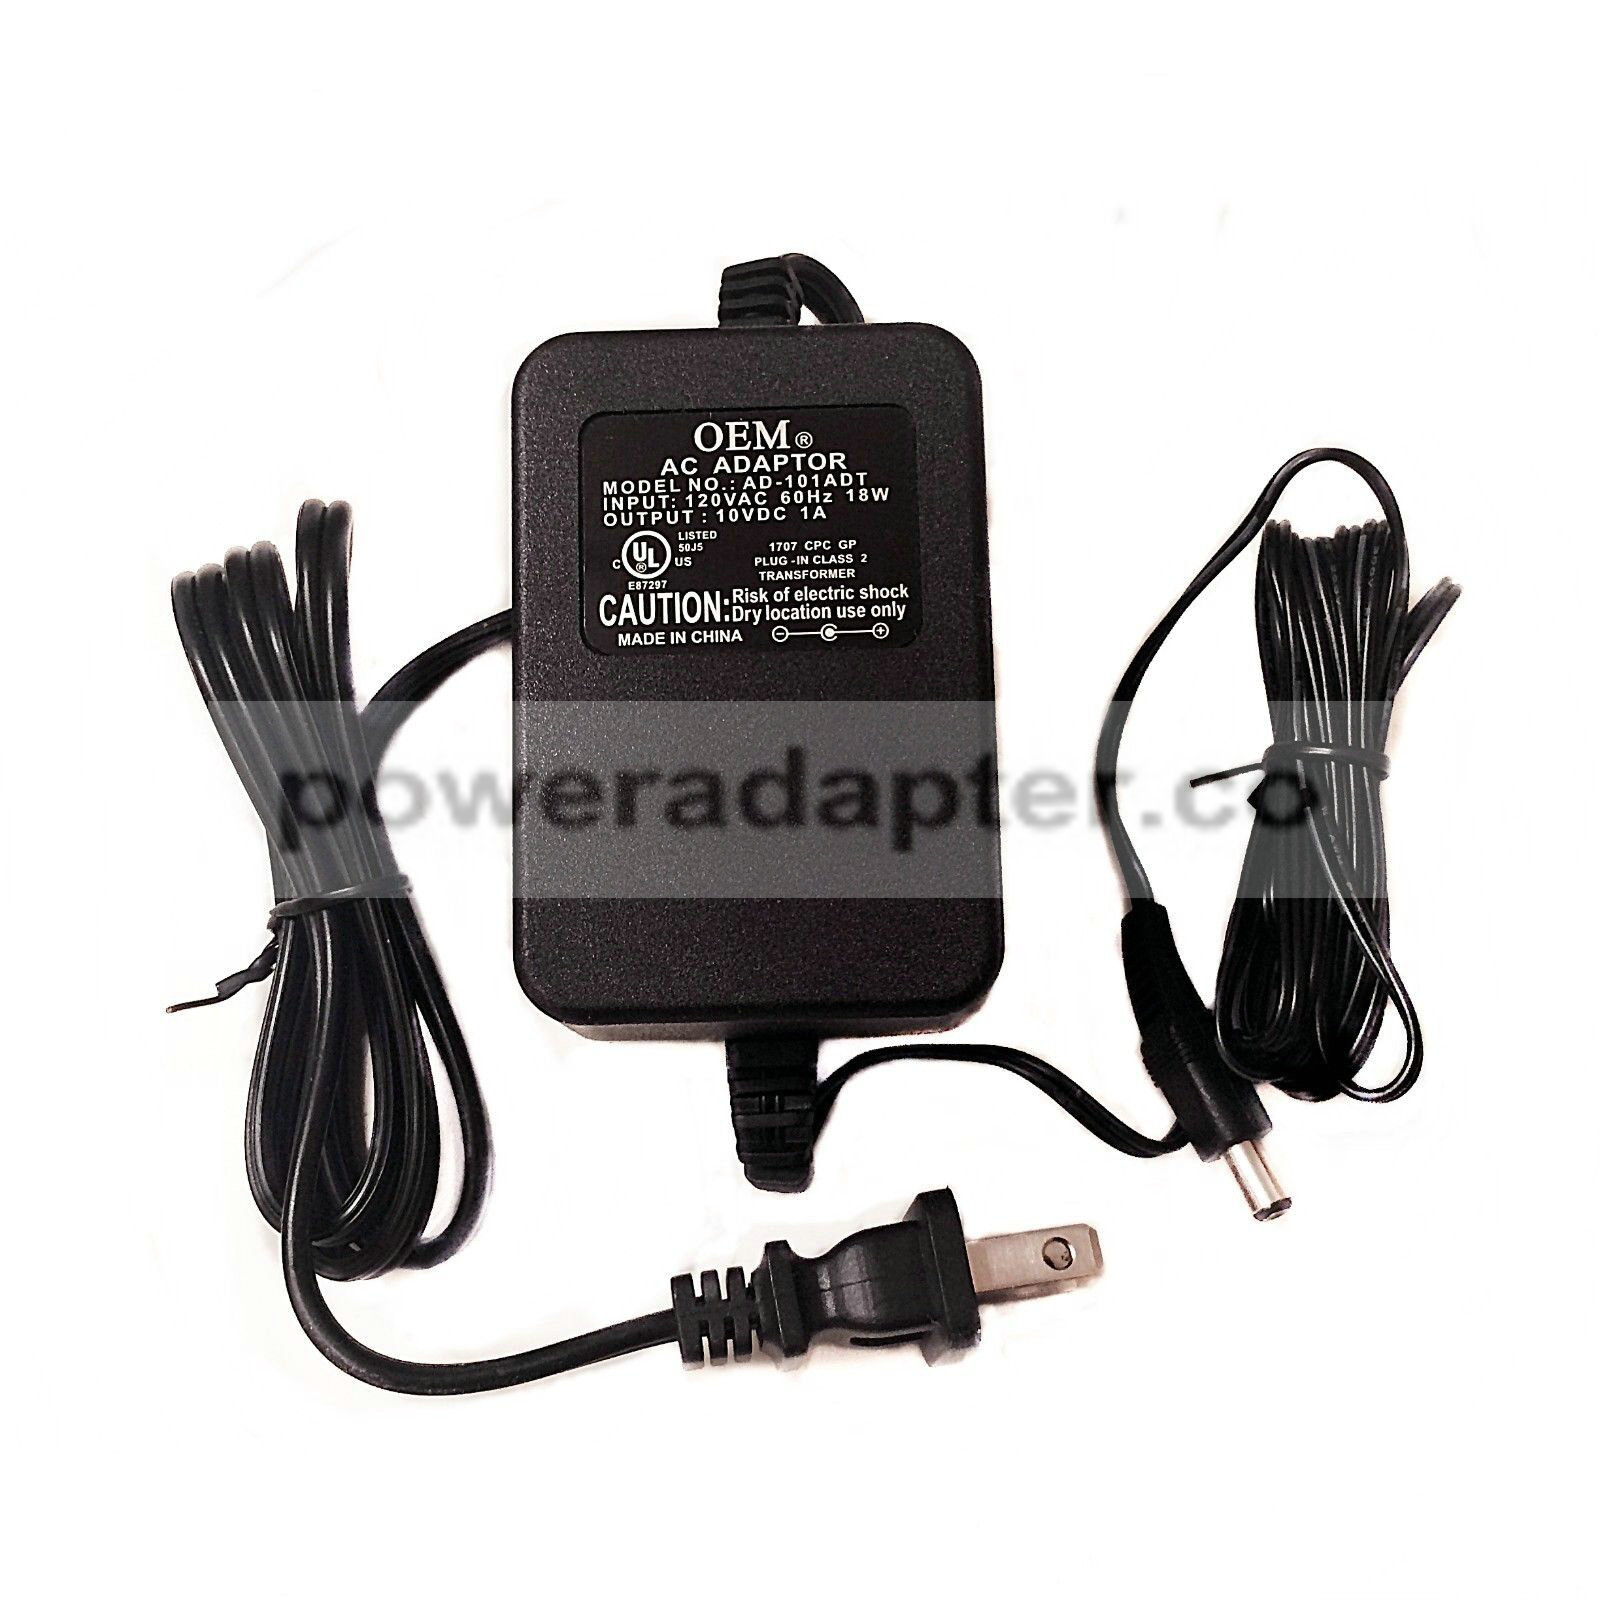 OEM AD-101ADT AC Power Adapter Supply - 10V 1A - 120VAC 60Hz 18W Condition: Used: An item that has been used previo